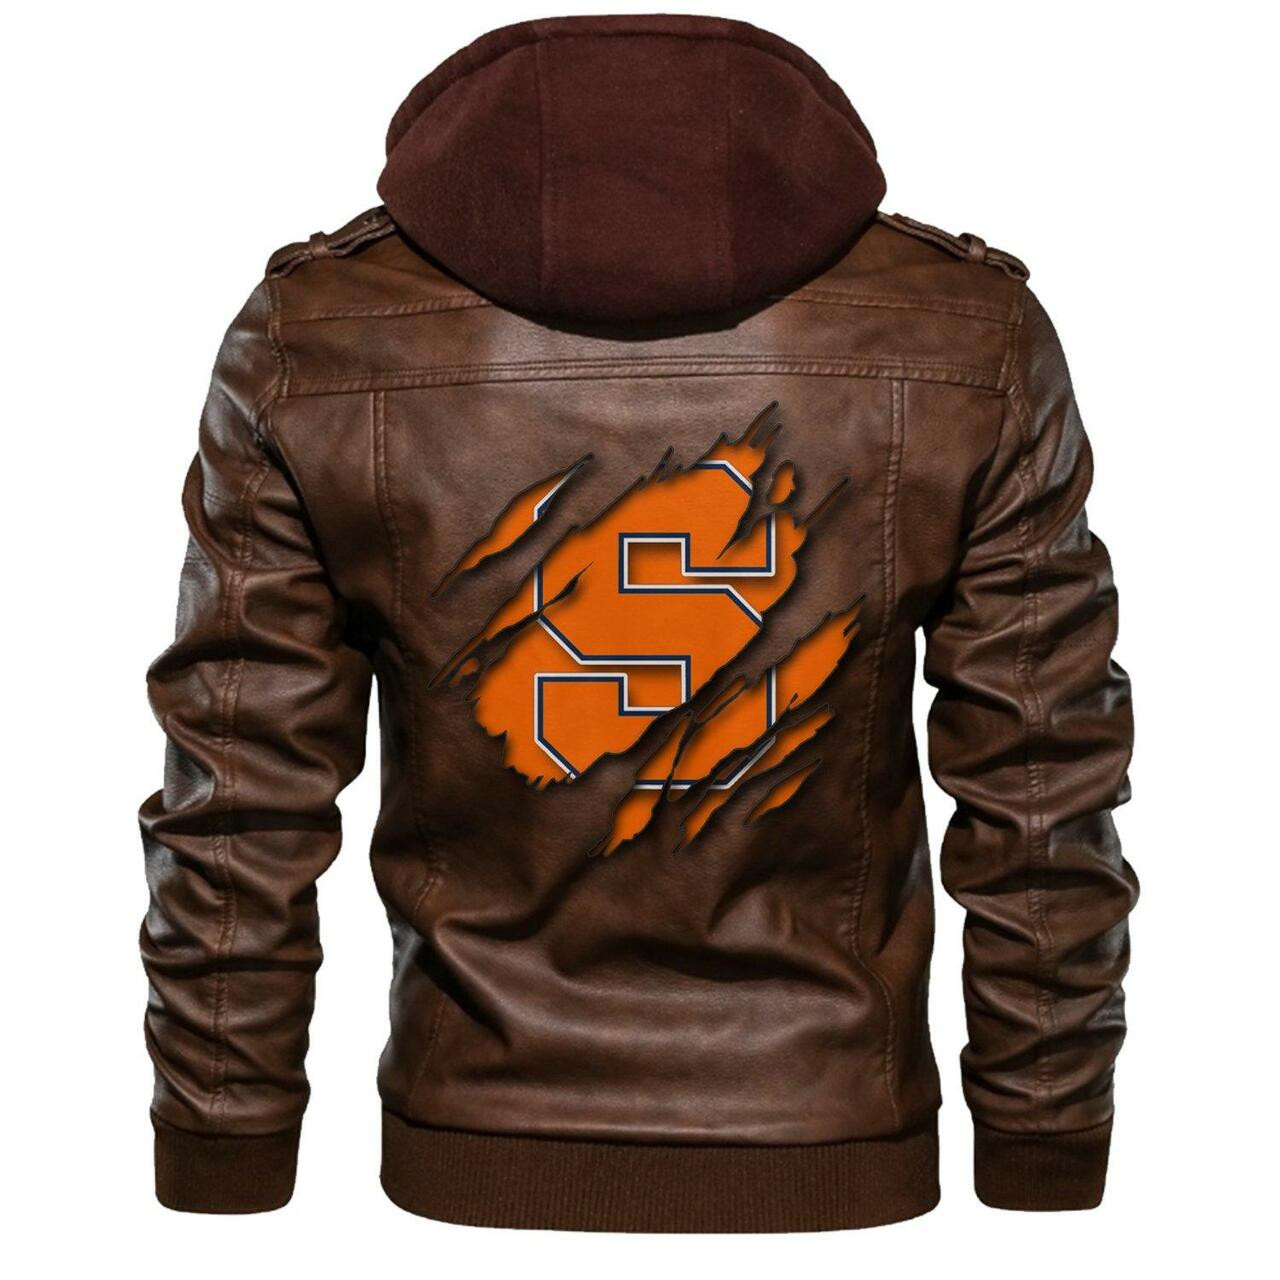 Top 200+ leather jacket so cool for your man 185